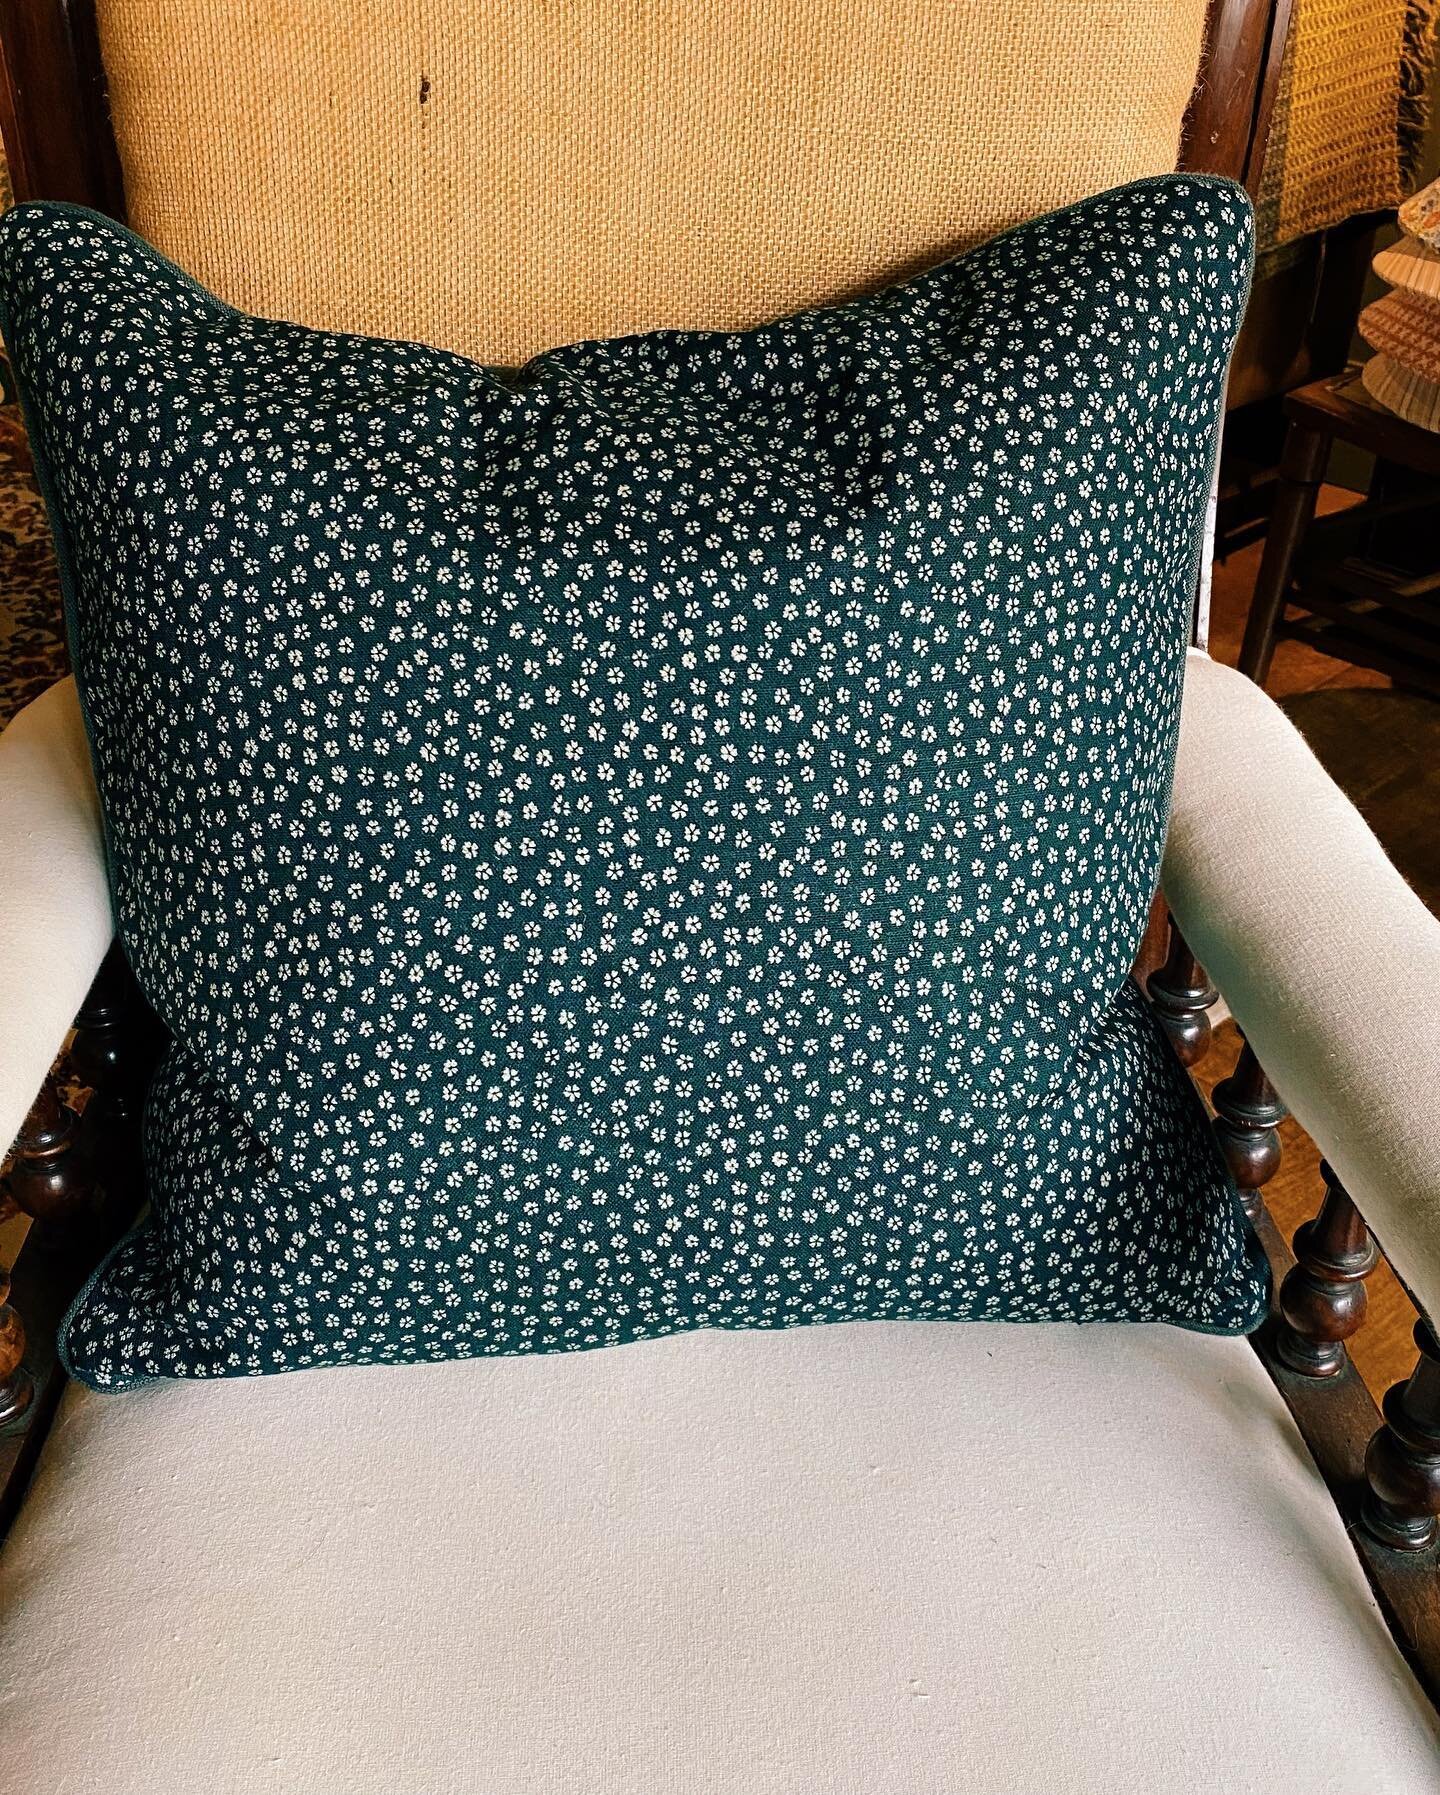 Now available. 

20 x 20&rdquo; scatter cushion faced in Robert Kime &lsquo;Yozakura&rsquo; cotton / linen mix, backed and piped in a complementary dyed linen with plush feather insert.

Made at Noble using fabric remnants left over from the upholste